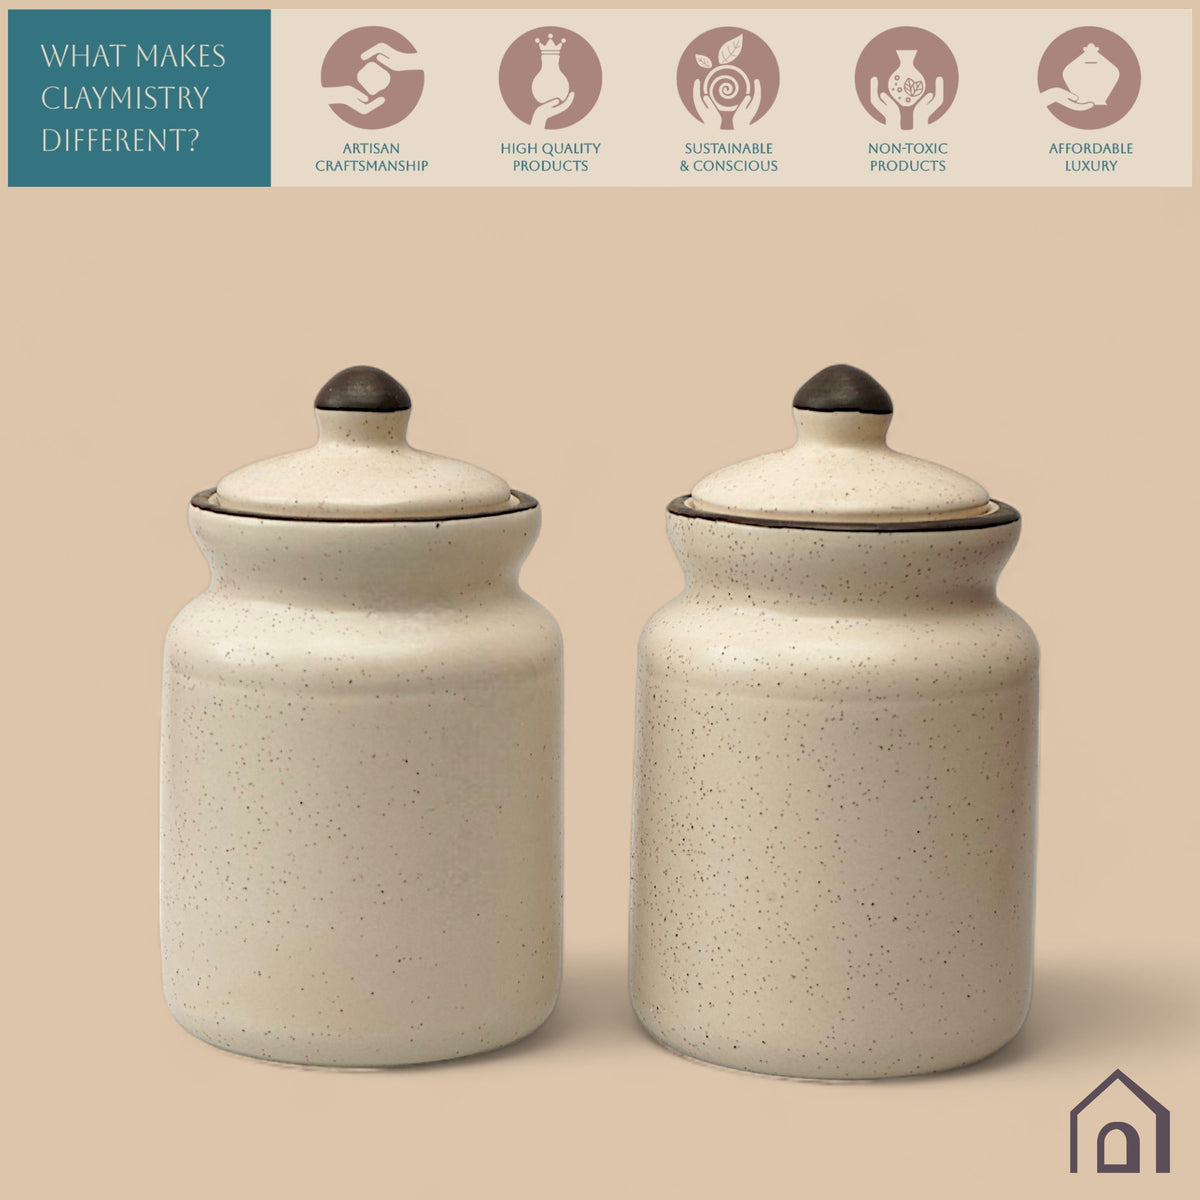 Claymistry Multi Utility Ceramic White with Brown Edges Storage Box with Lid | 9cm * 9cm * 16cm | Matte Finish | Spices, Ghee, Sugar, Food Storage Container | Dishwasher Safe | Tea Coffee Kettle Jar